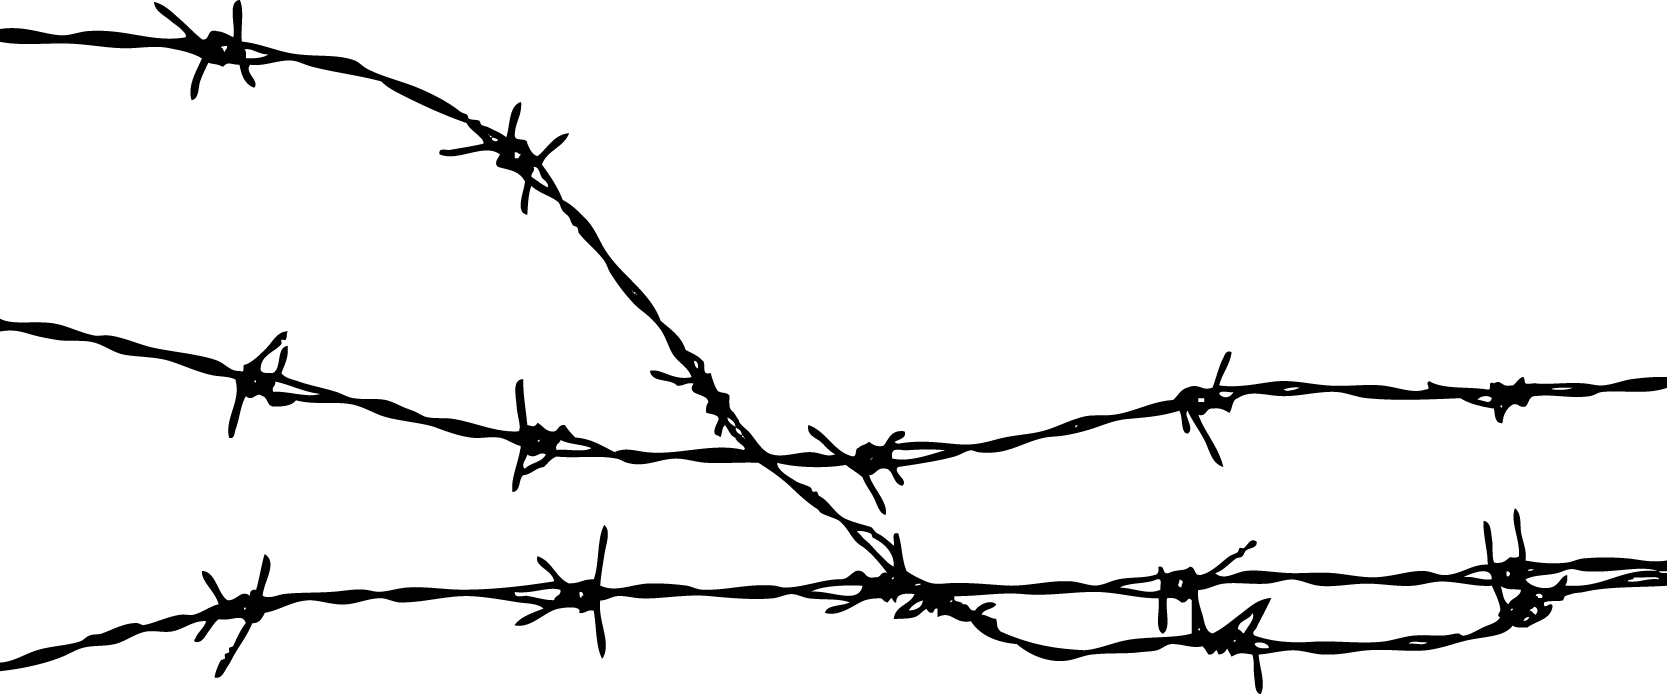 Free Barbed Wire Clip Art - ClipArt Best